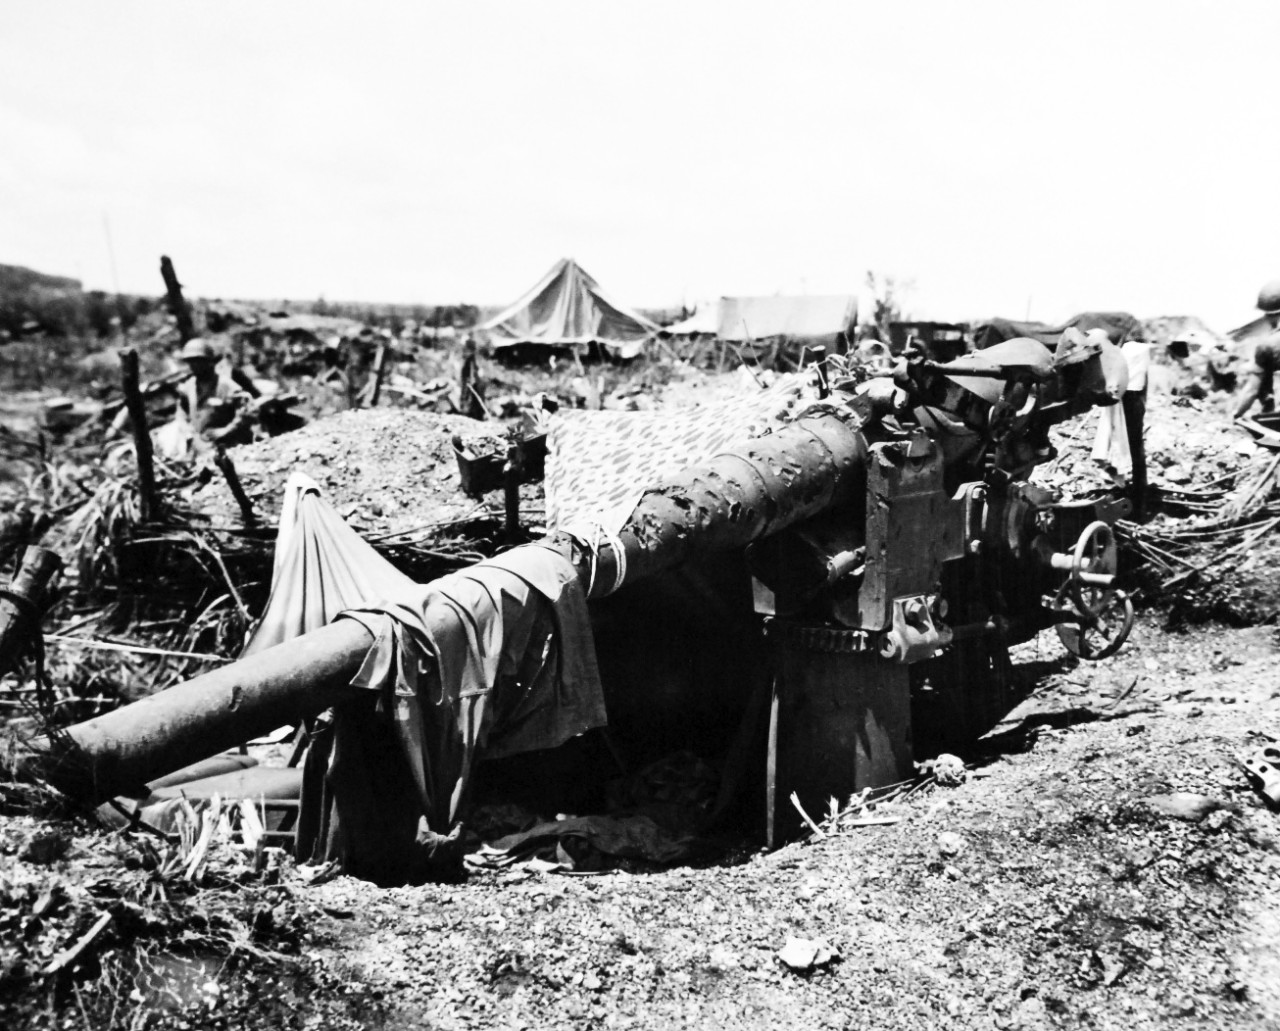 80-G-307884:  Invasion of Tinian, July-August 1944.   Japanese guns captured on Tinian.  Six-inch coastal defense gun.  Photograph received March 20, 1945.      Official U.S. Navy photograph, now in the collections of the U.S. Navy.  (2017/04/11).  